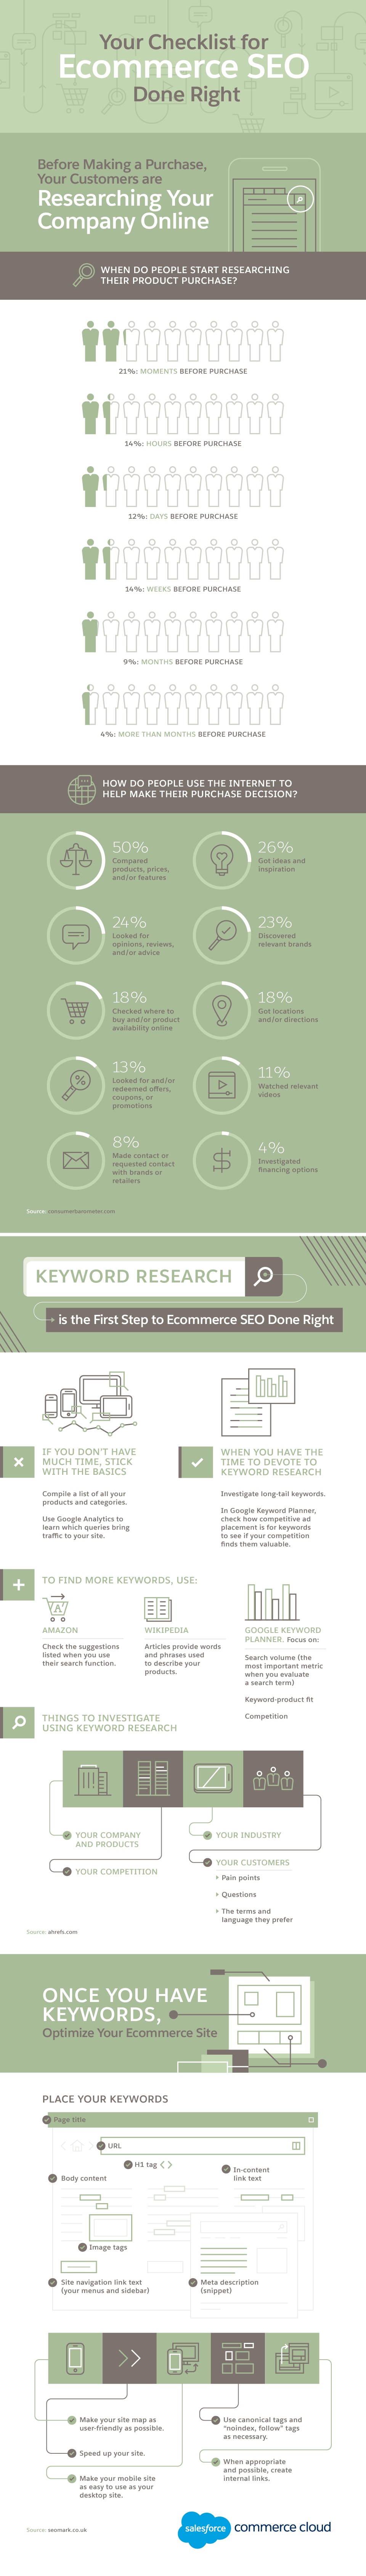 Your Checklist for Ecommerce SEO Done Right